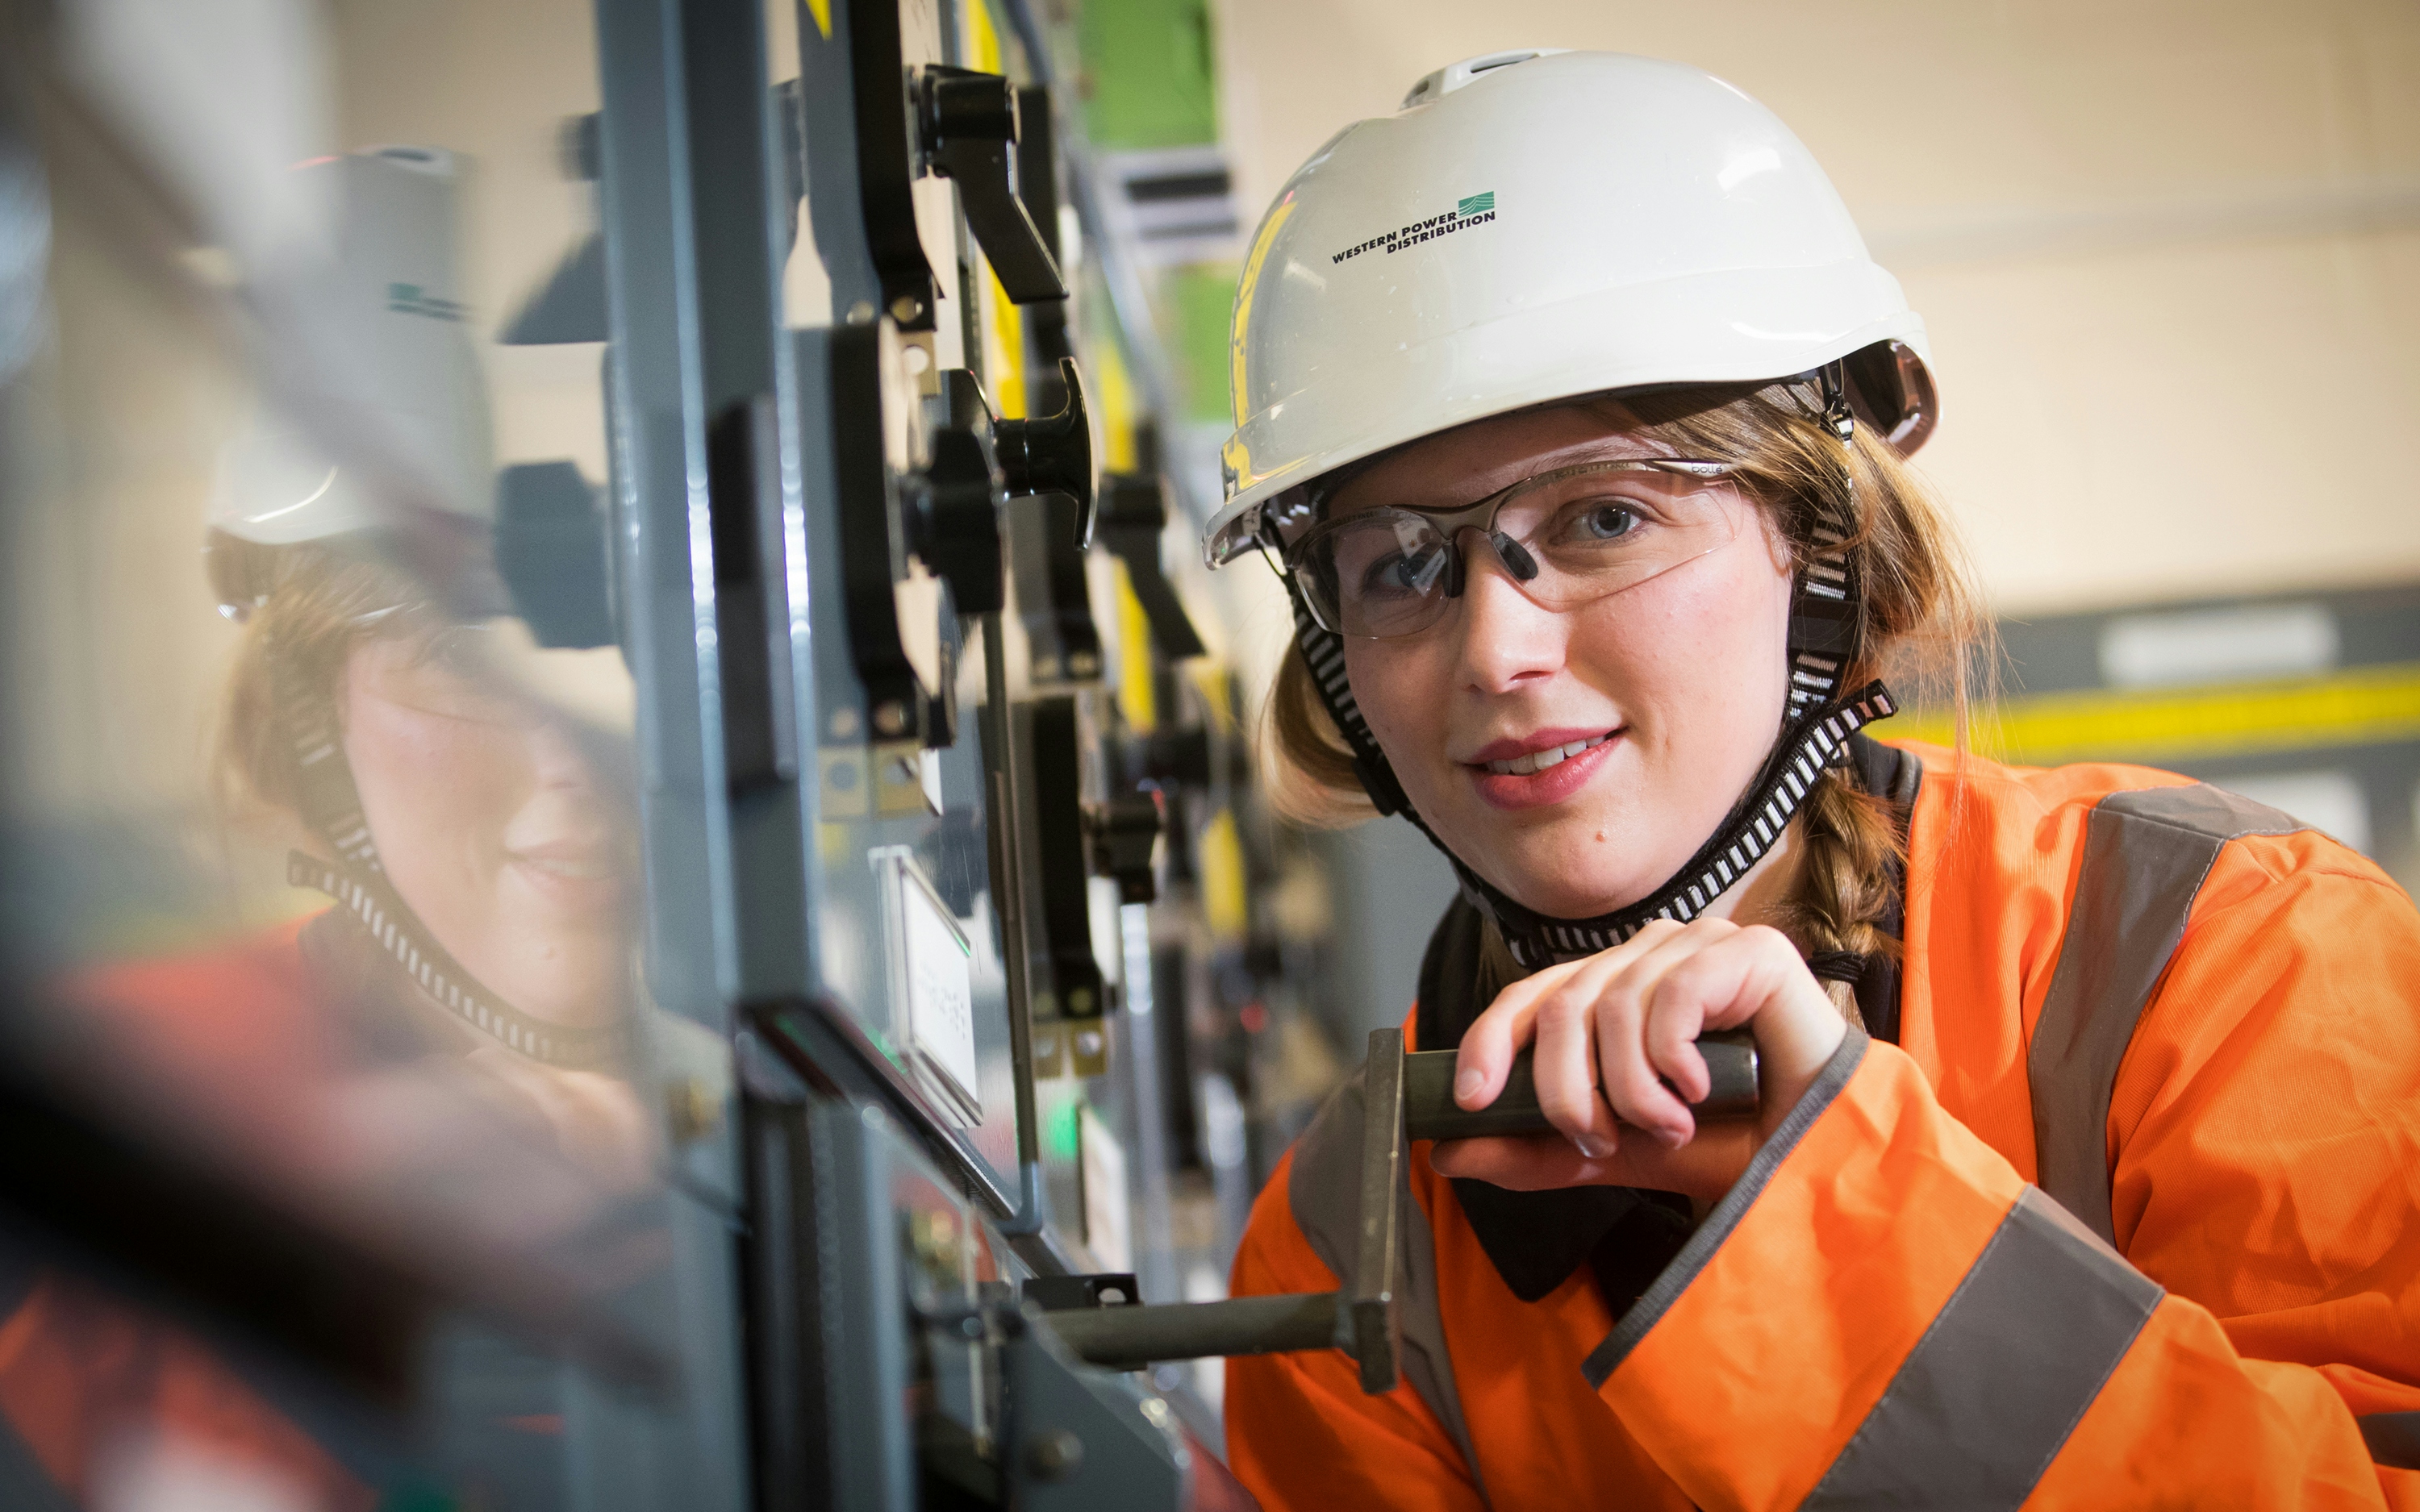 A woman with a hard hat working in an industrial setting